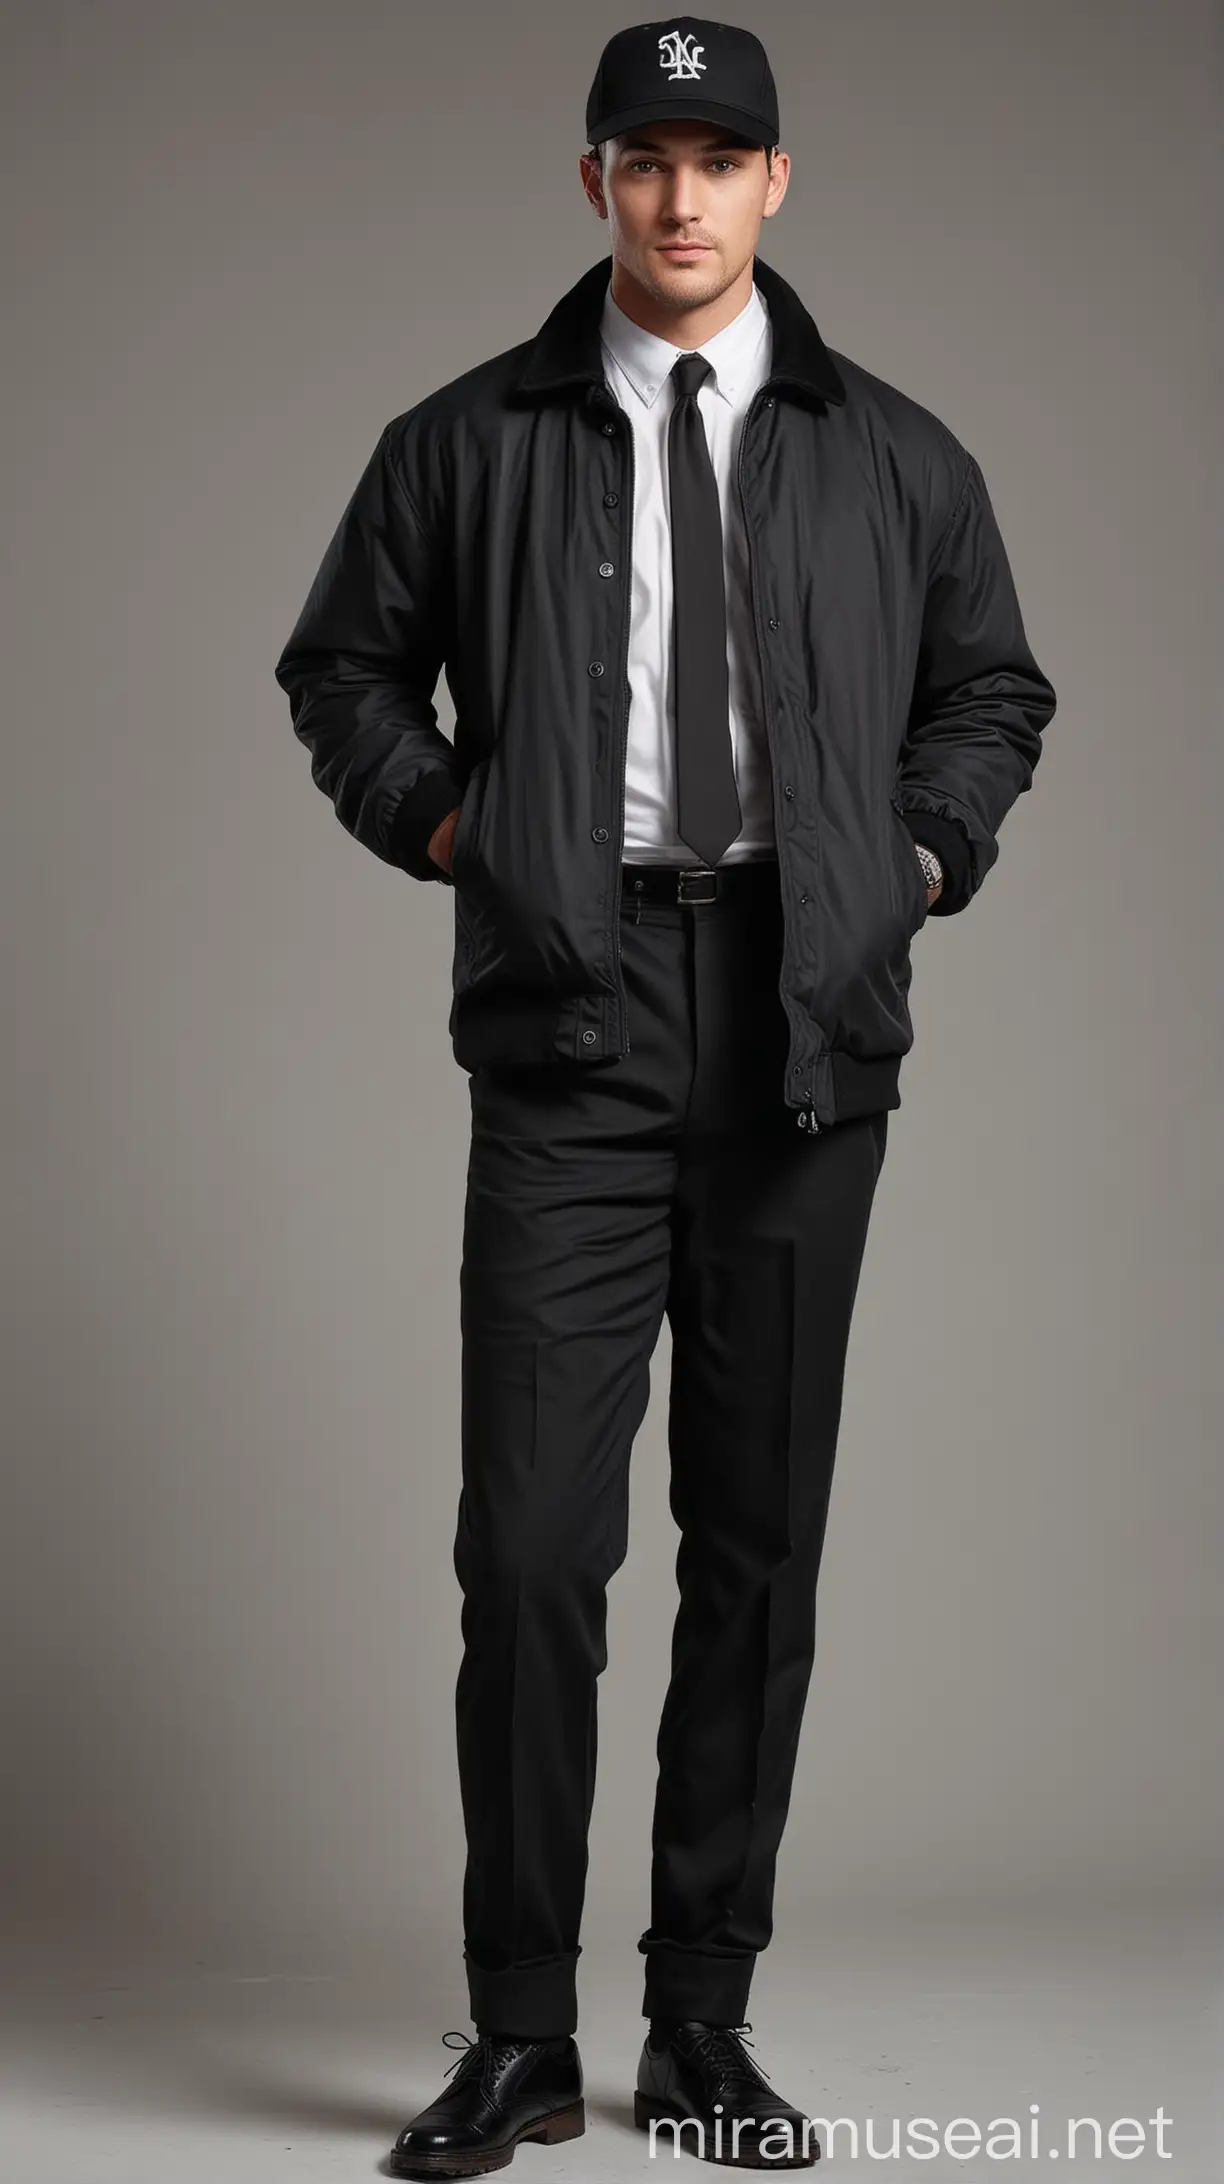 Official Man in Black Winter Attire on White Background